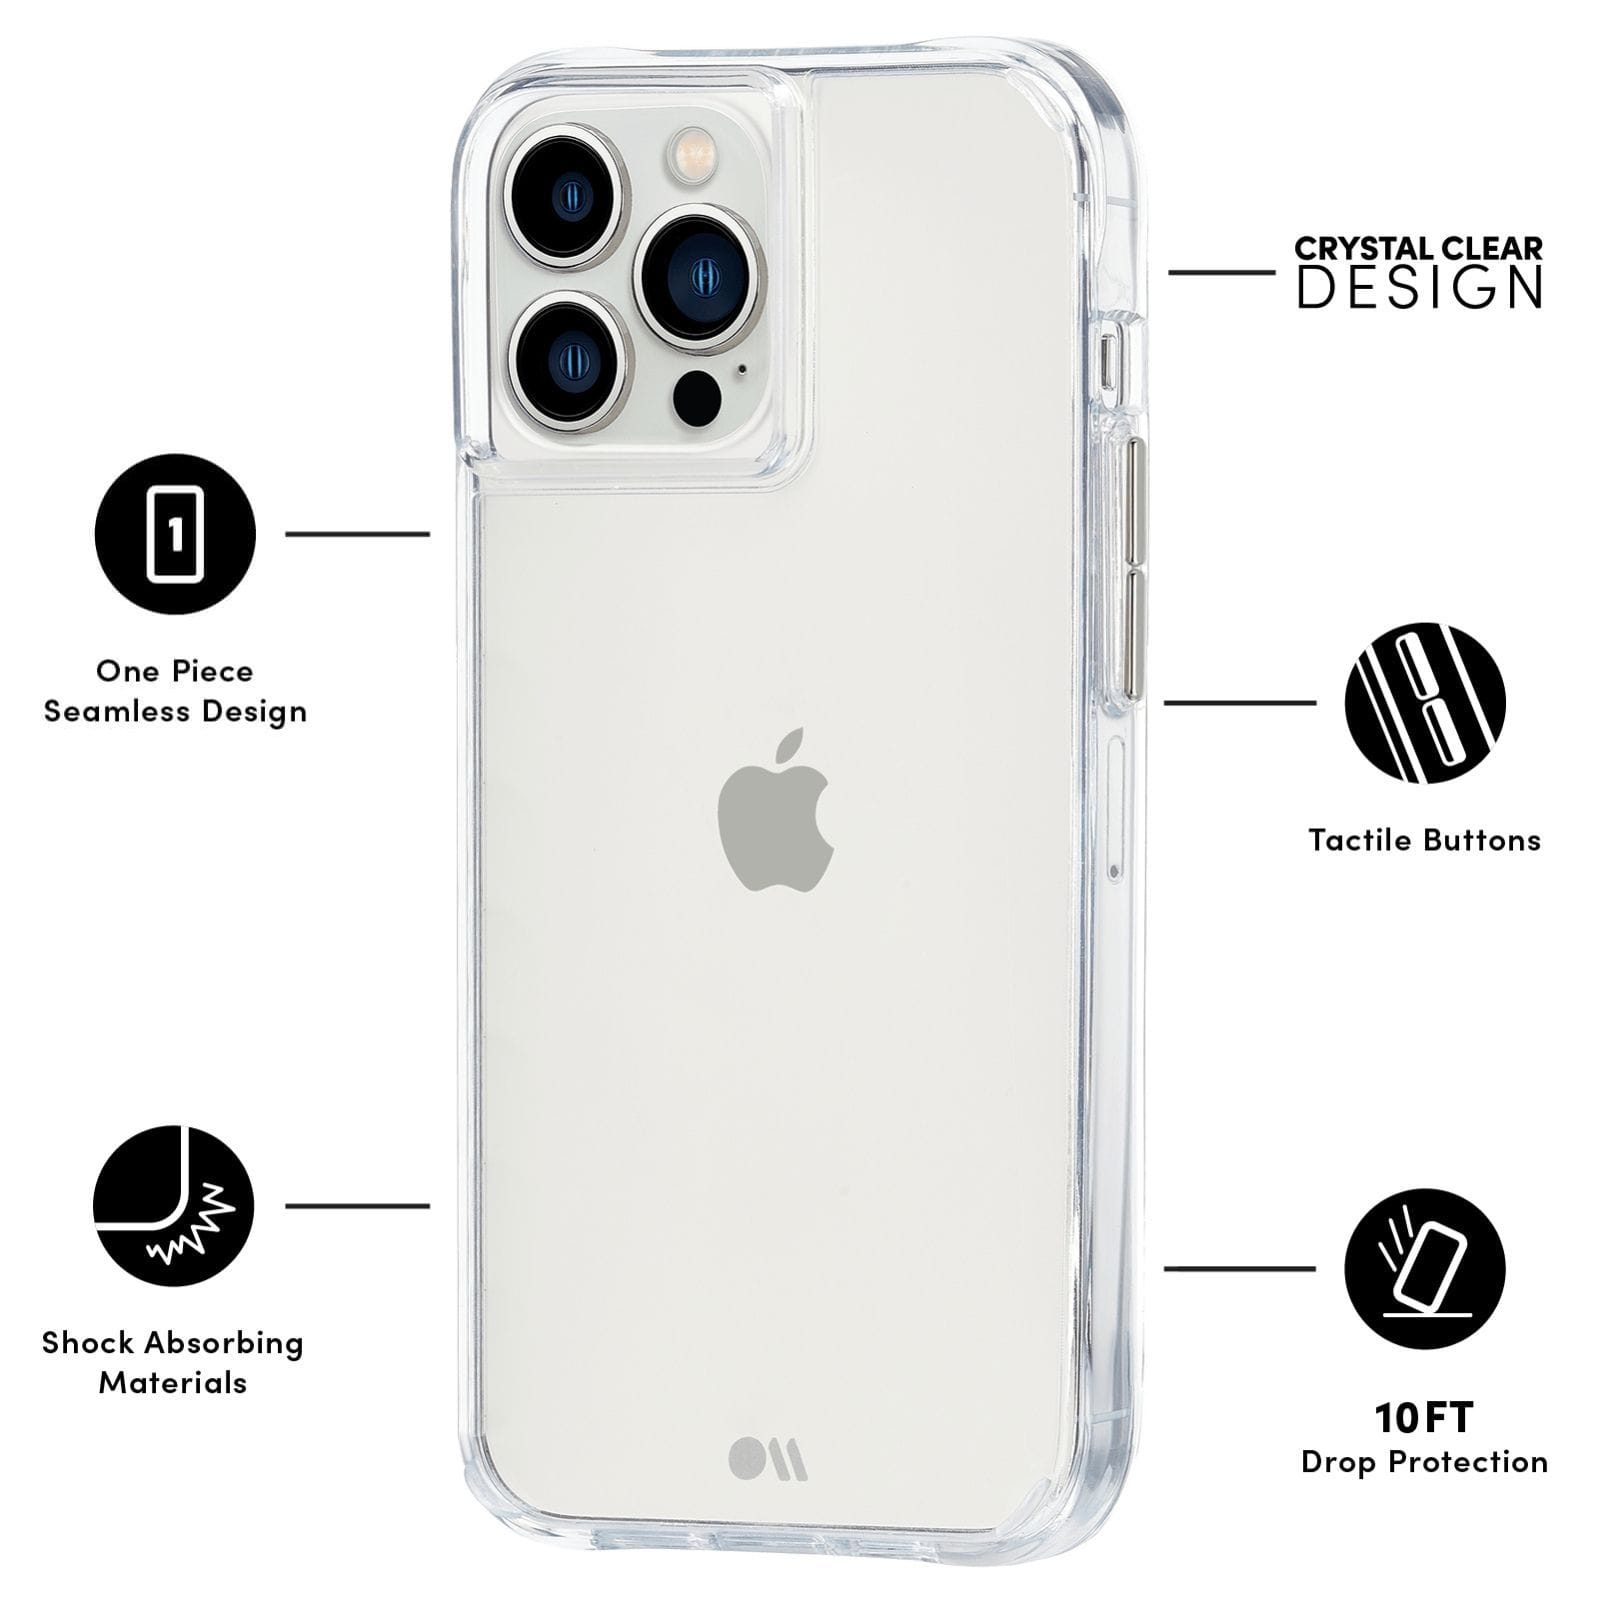 FEATURES: ONE PIECE SEAMLESS DESIGN, SHOCK ABSORBING MATERIALS, CRYSTAL CLEAR DESIGN, TACTILE BUTTONS, 10 FT DROP PROTECTION. COLOR::CLEAR